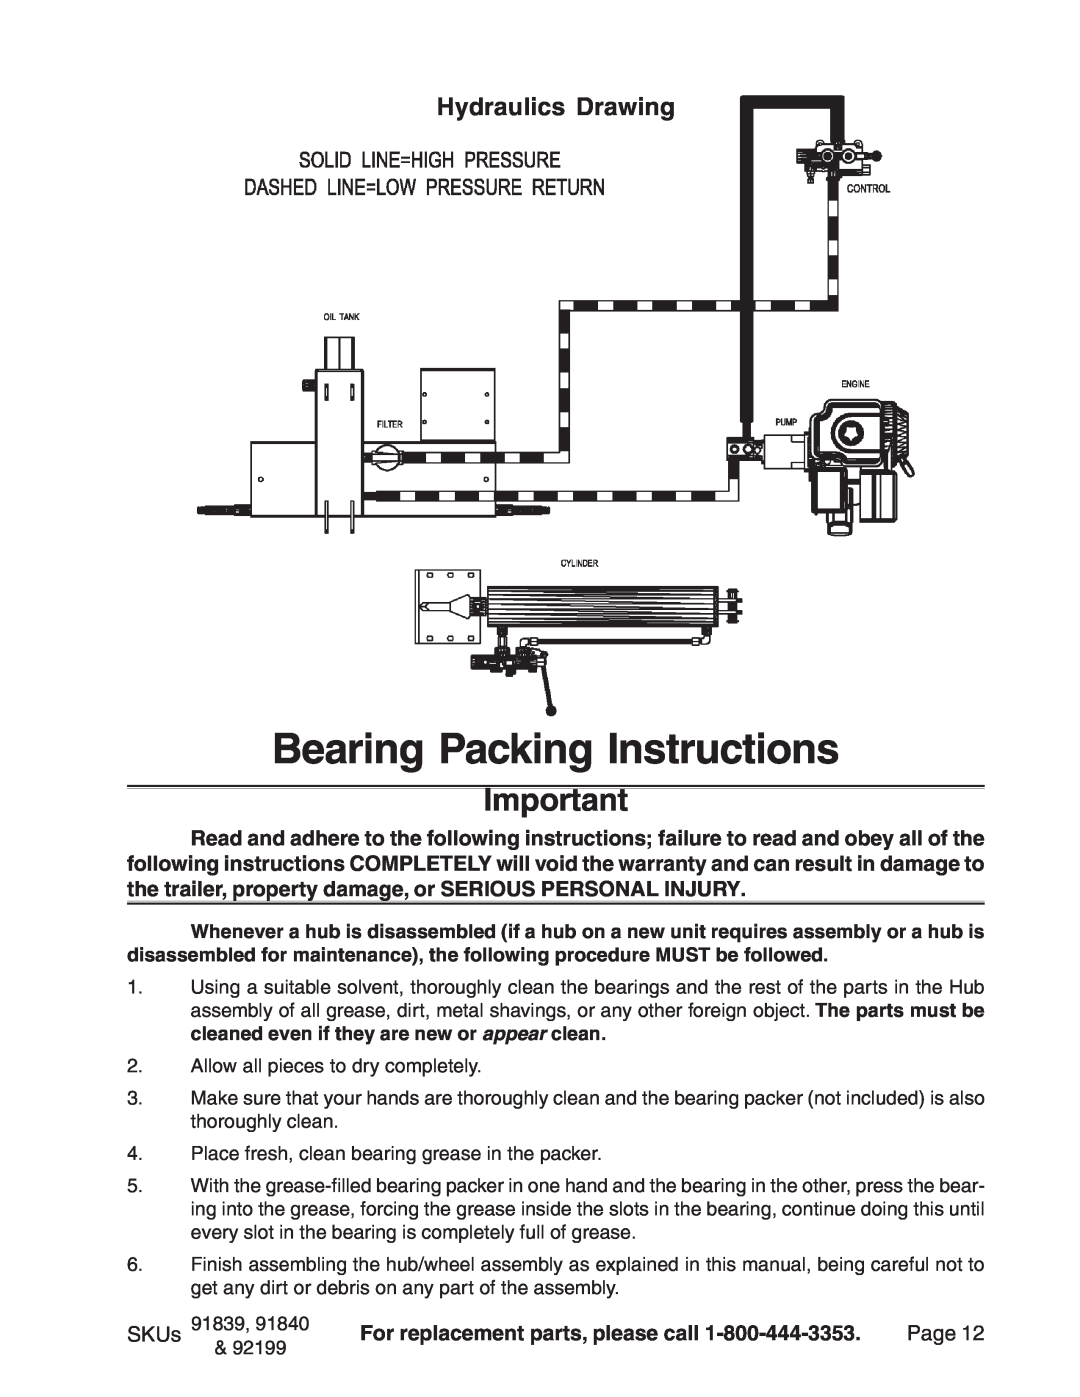 Harbor Freight Tools 91839, 91840, 92199 manual Bearing Packing Instructions, Hydraulics Drawing 